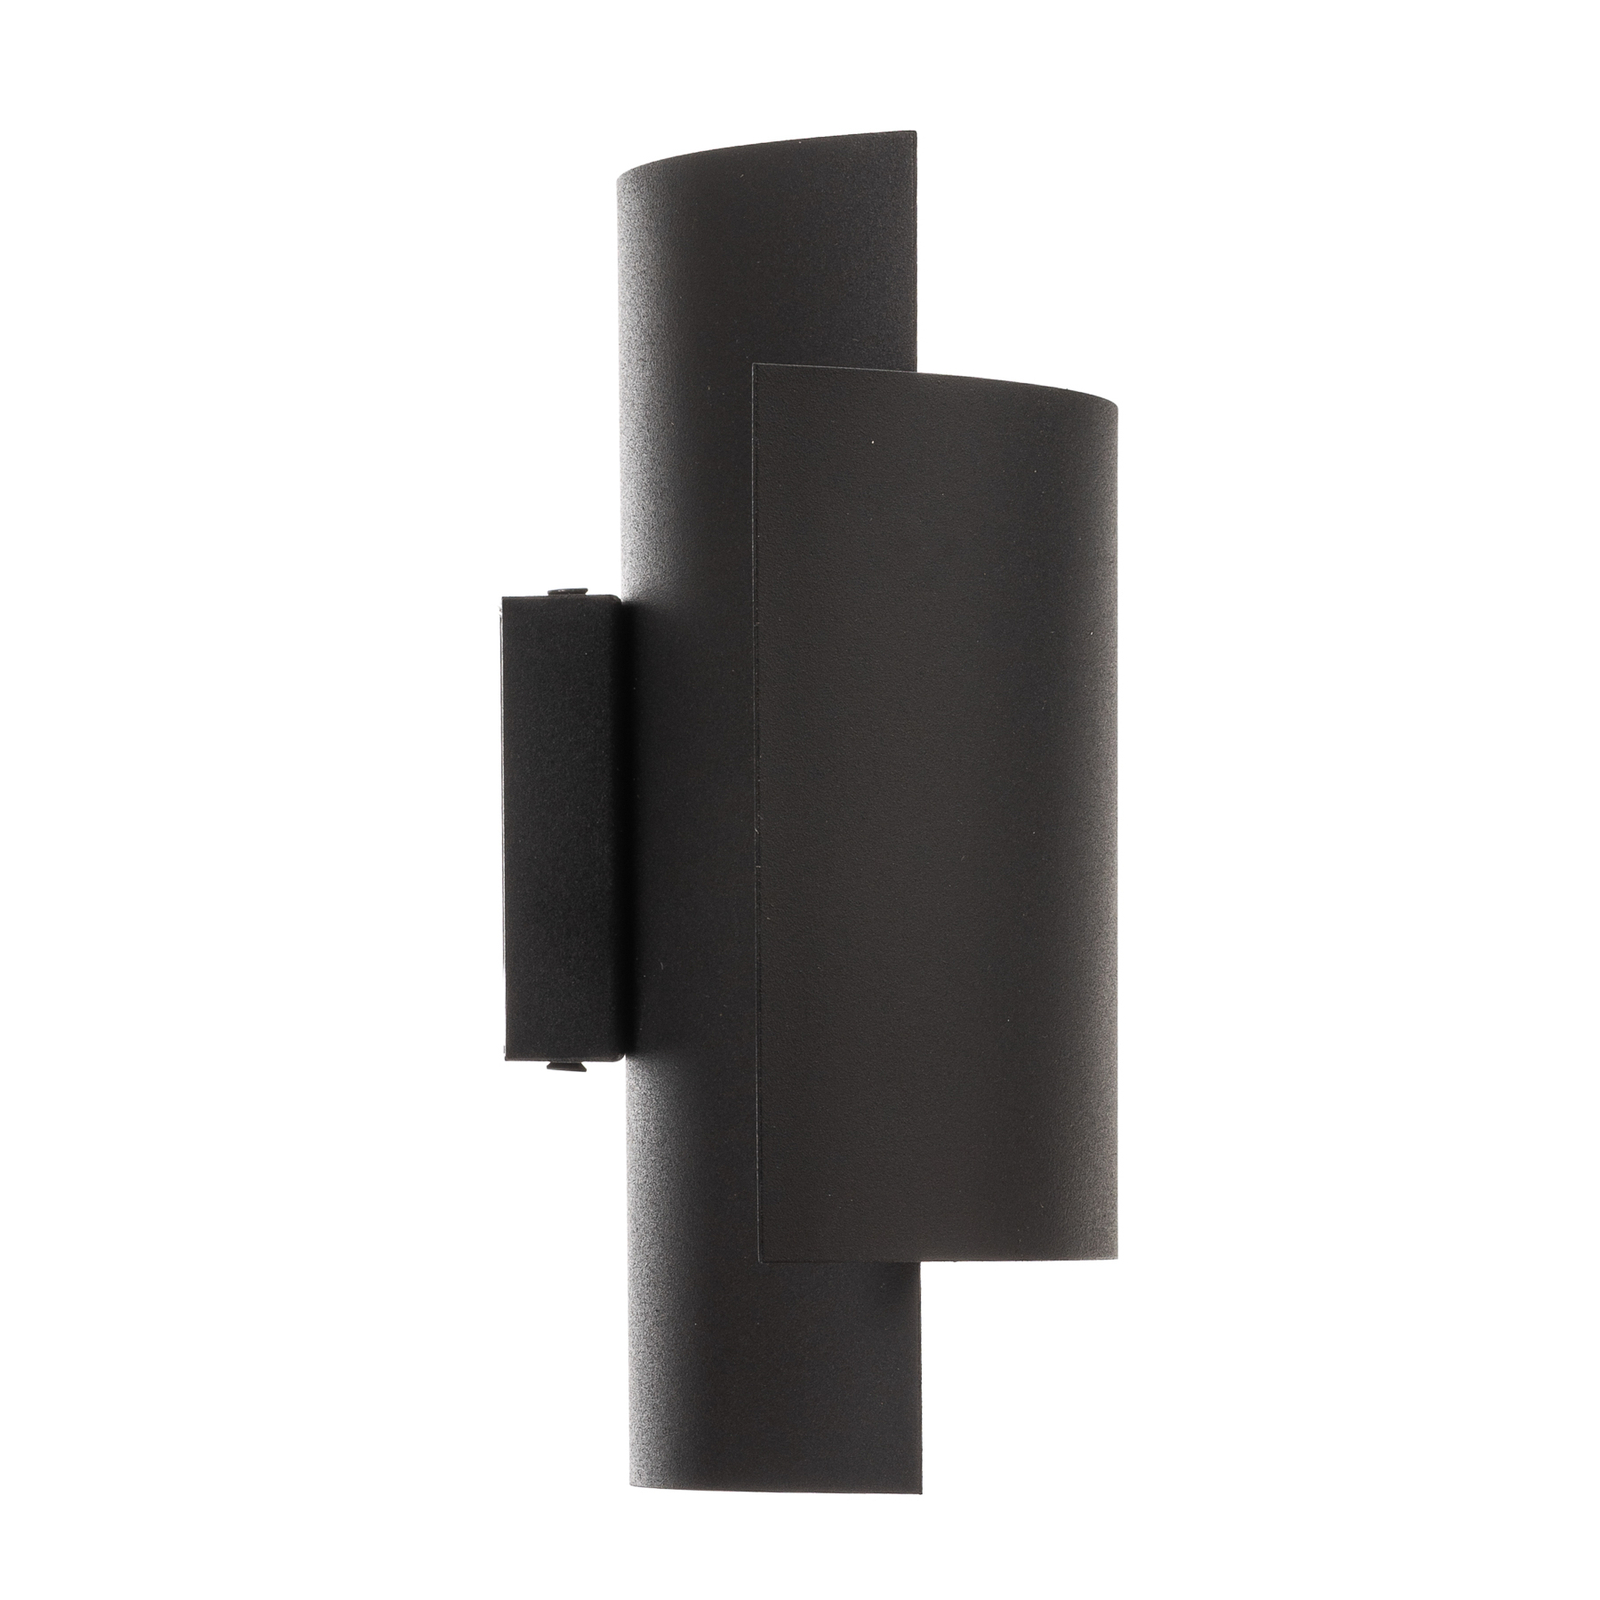 Pako wall lamp made of two steel plates in black